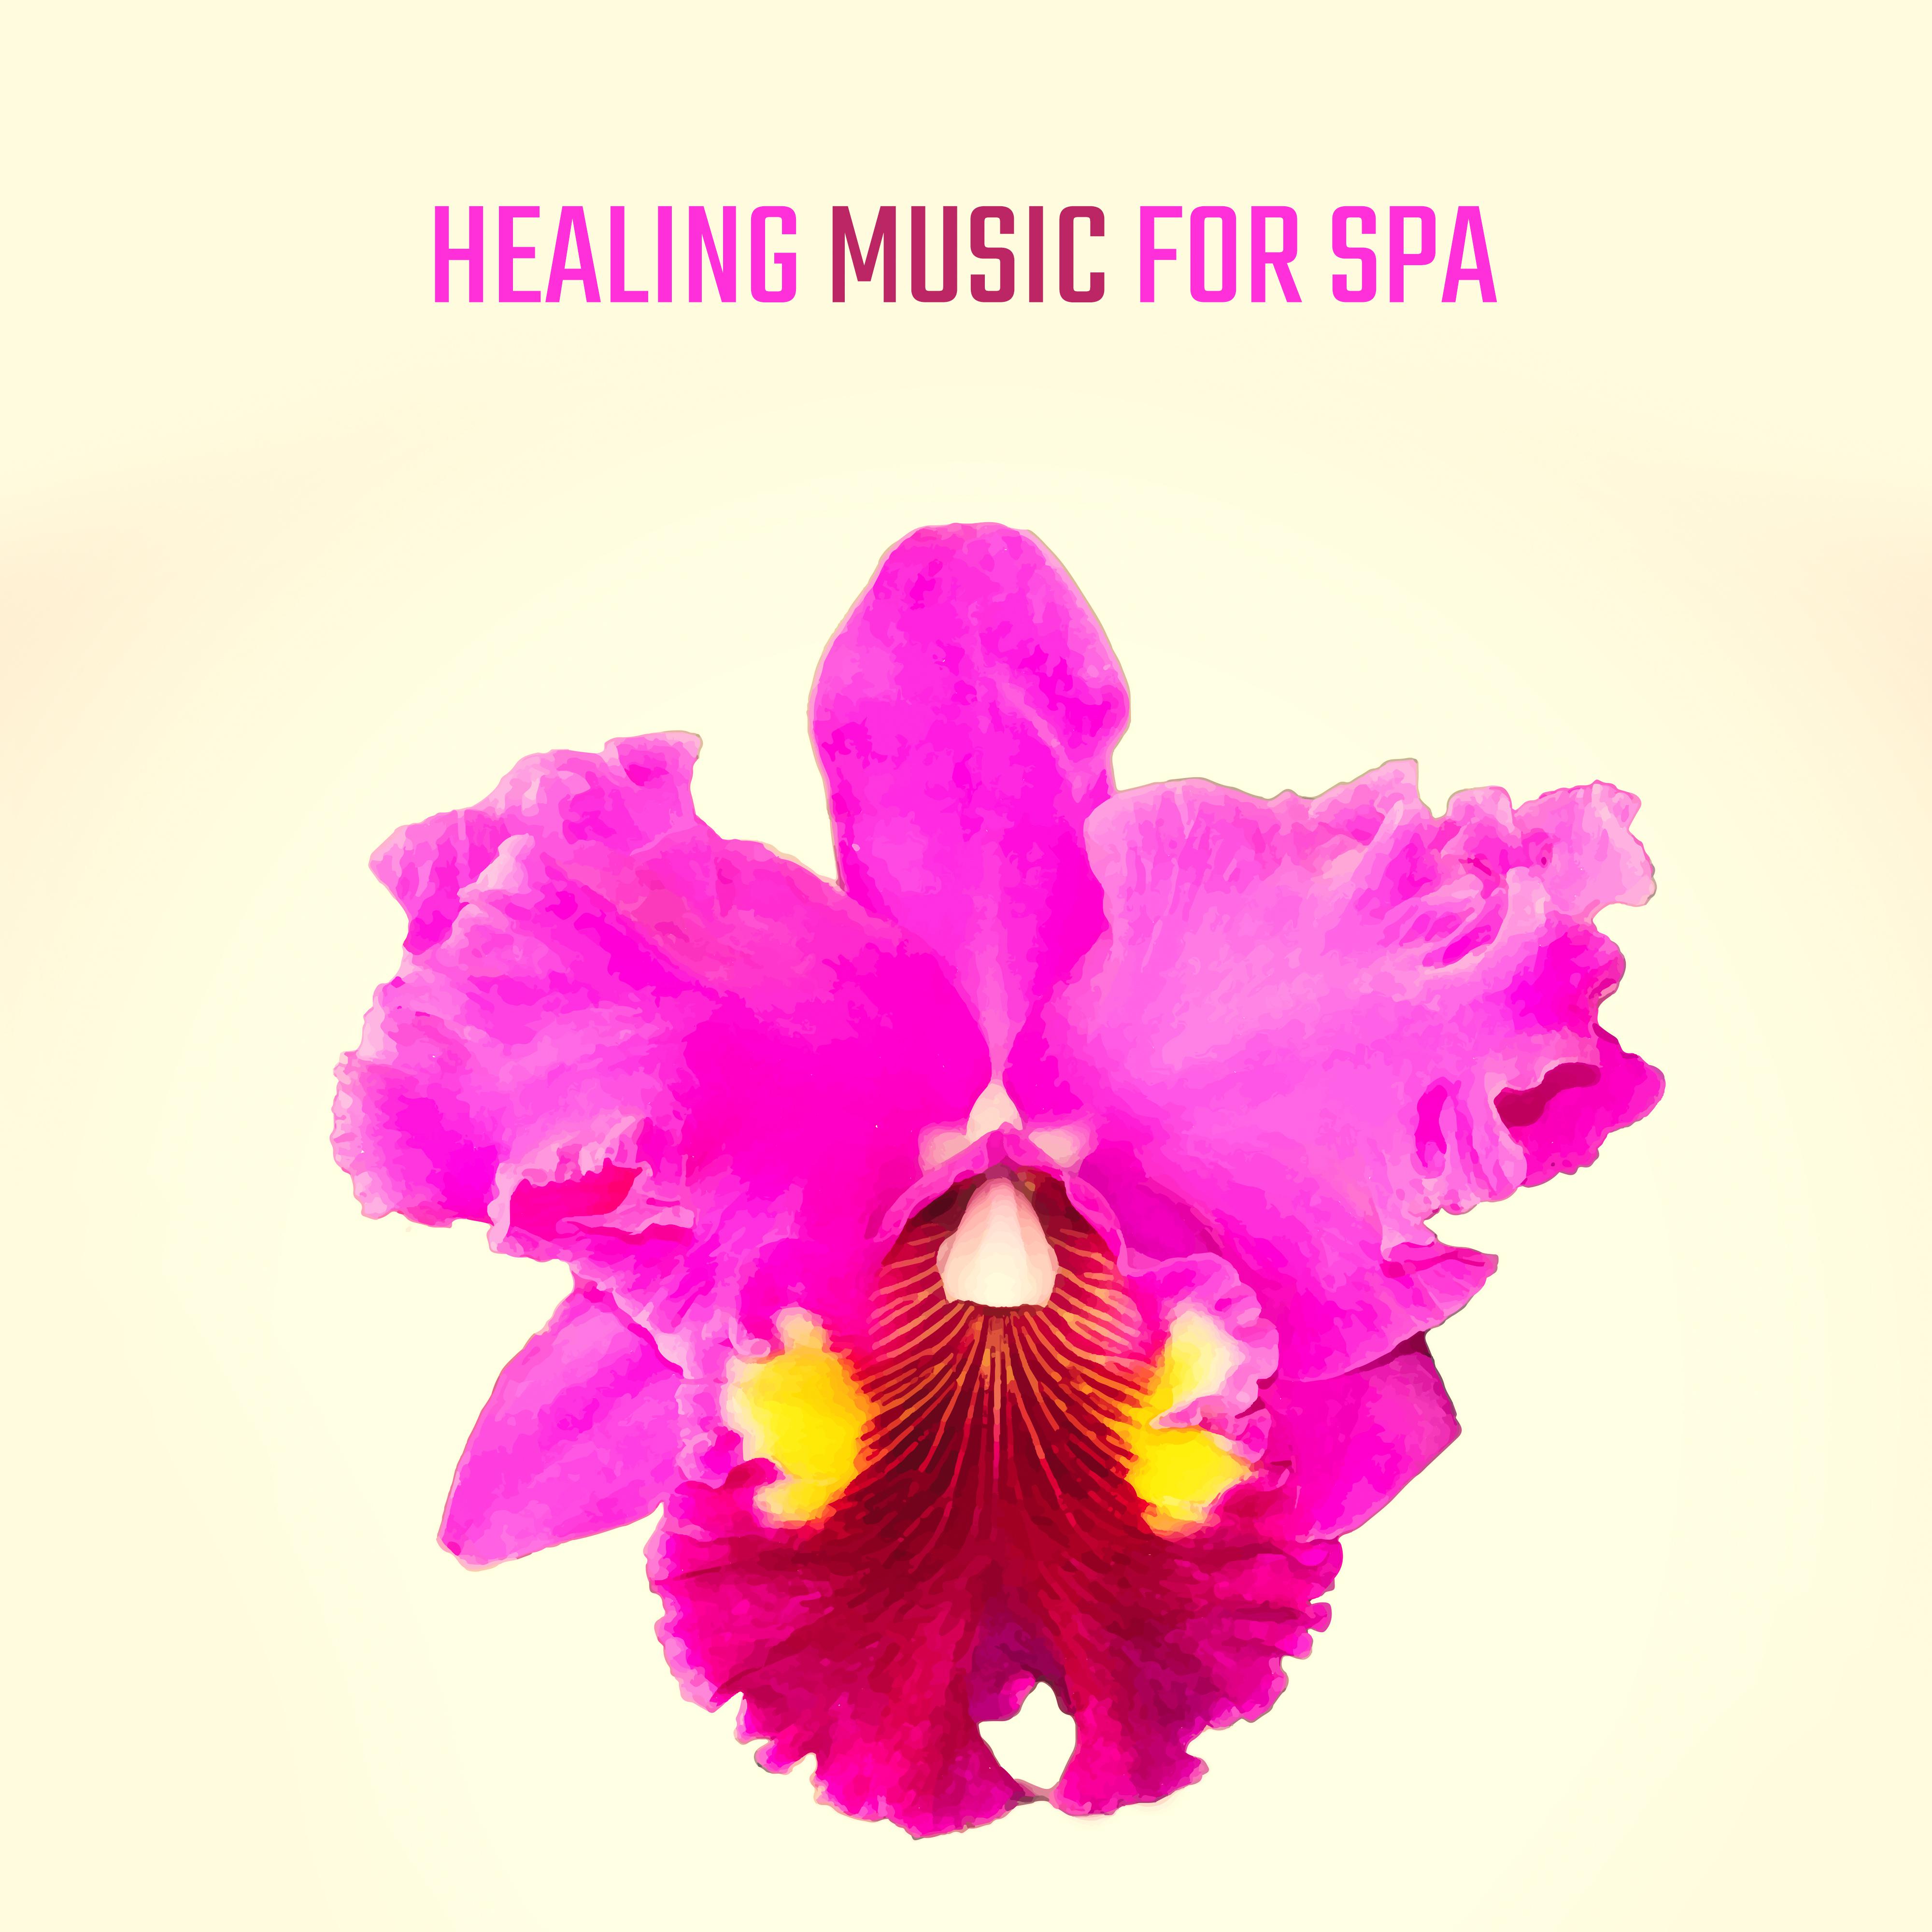 Healing Music for Spa  Massage Music for Relaxation, Zen, Melodies for Body, Inner Harmony, Total Chill, New Age Music to Calm Down, Spa Tunes